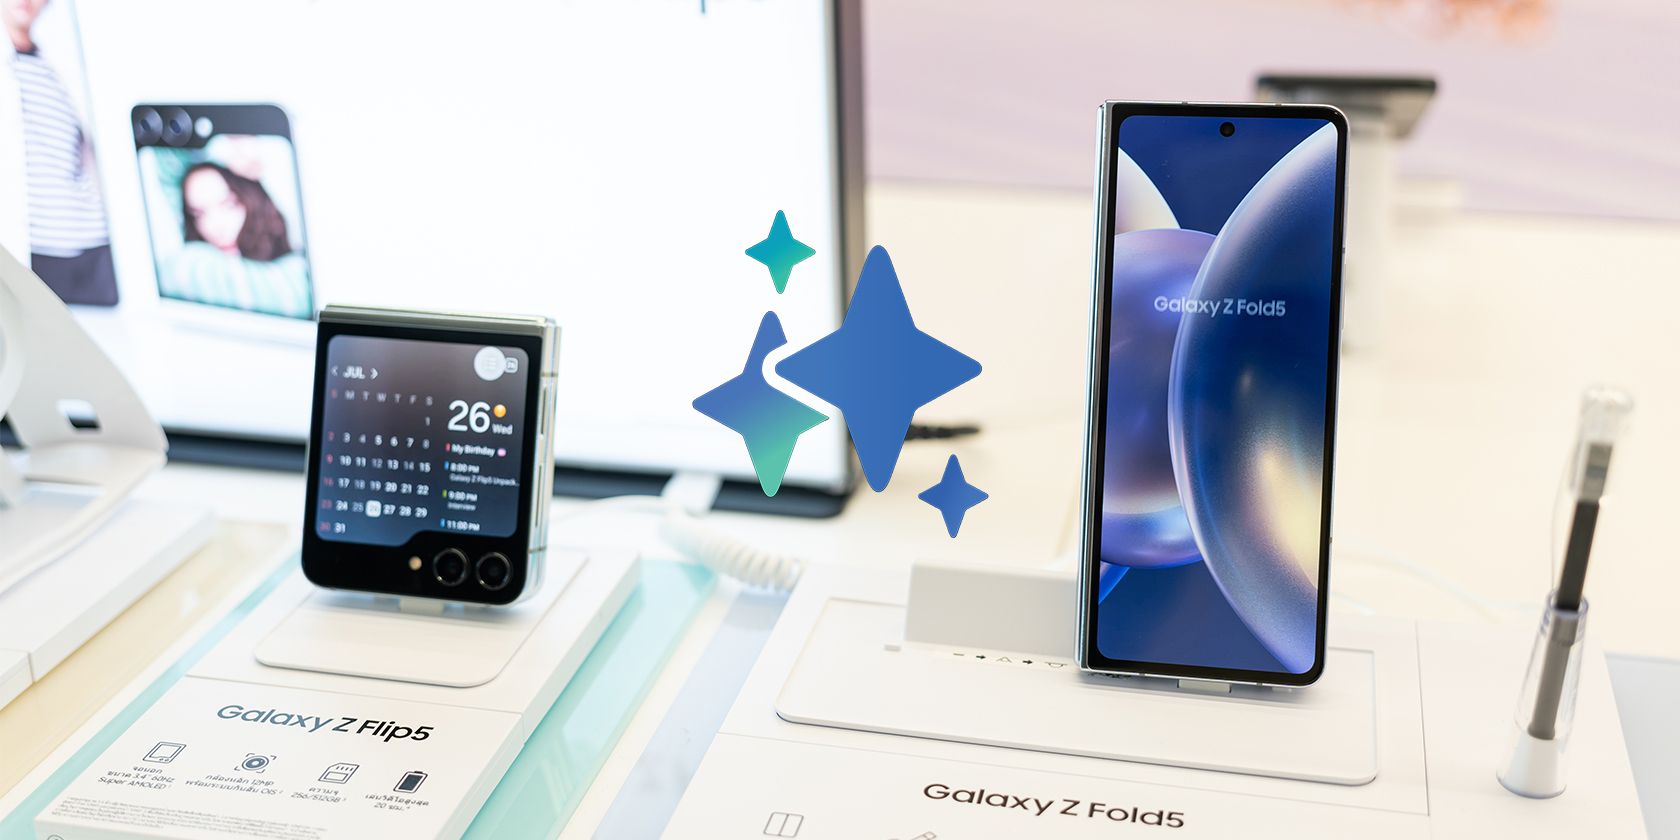 Galaxy Z Flip 5 and Z Fold 5 demo units on display at a Samsung booth